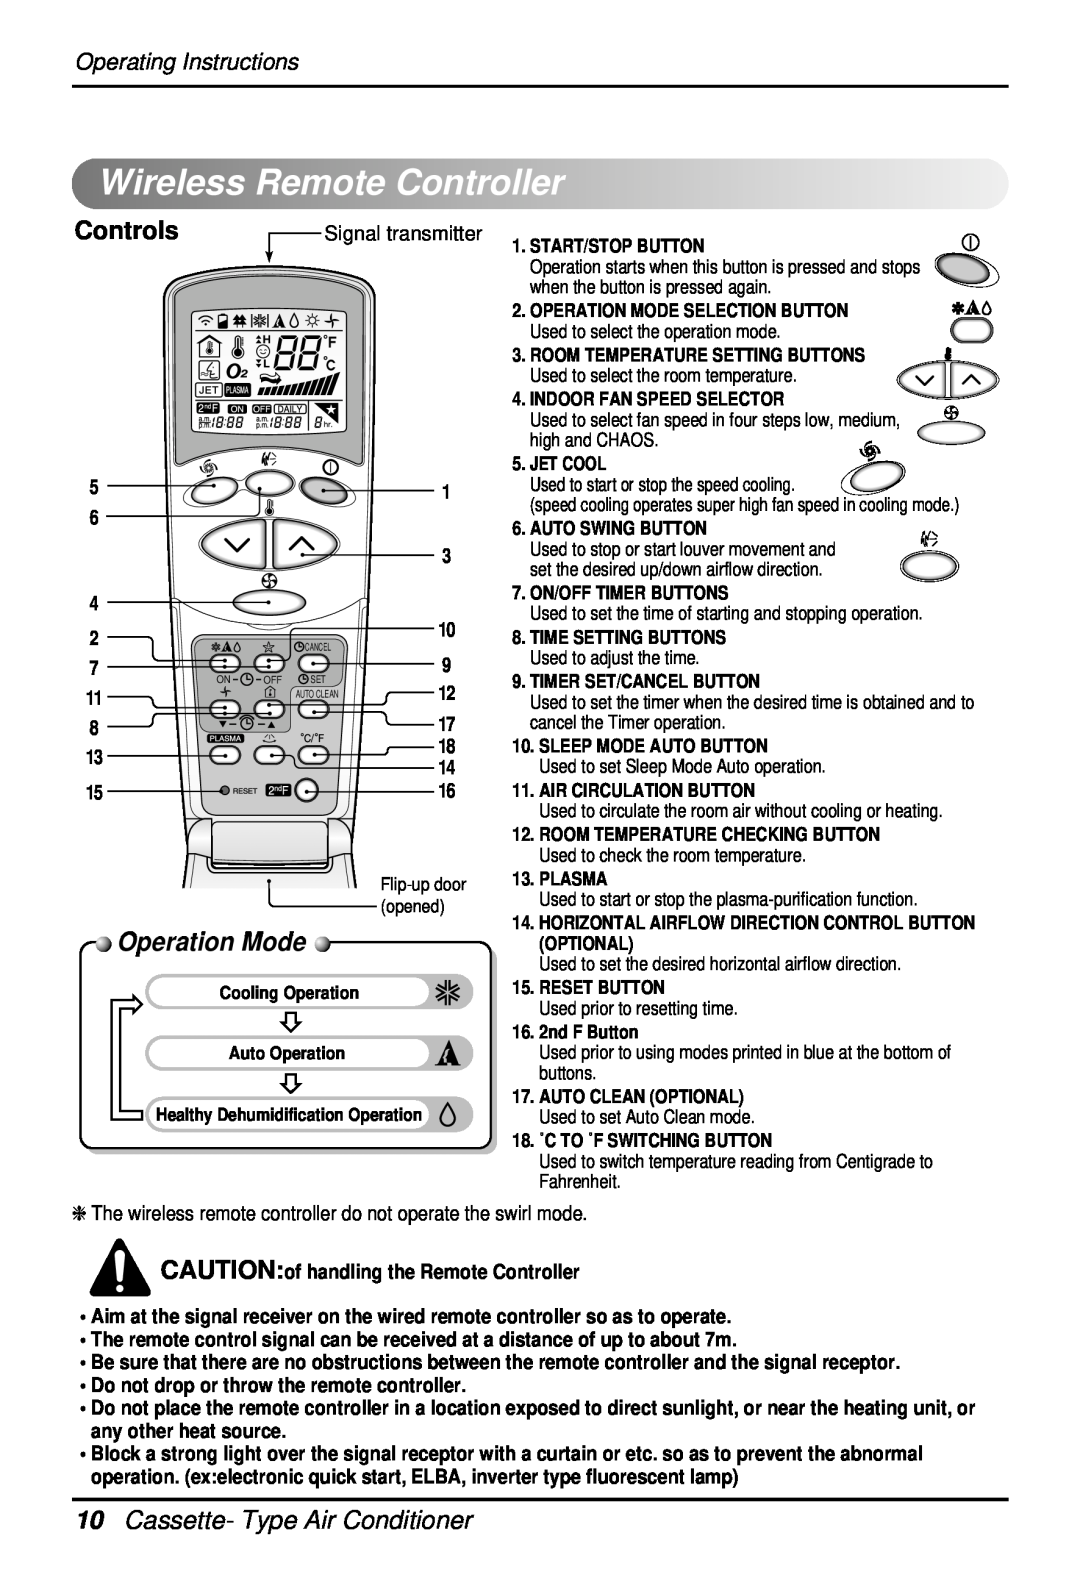 LG Electronics 3828A22005P owner manual WirelessRemoteController, Controls, Cassette- Type Air Conditioner, Operation Mode 